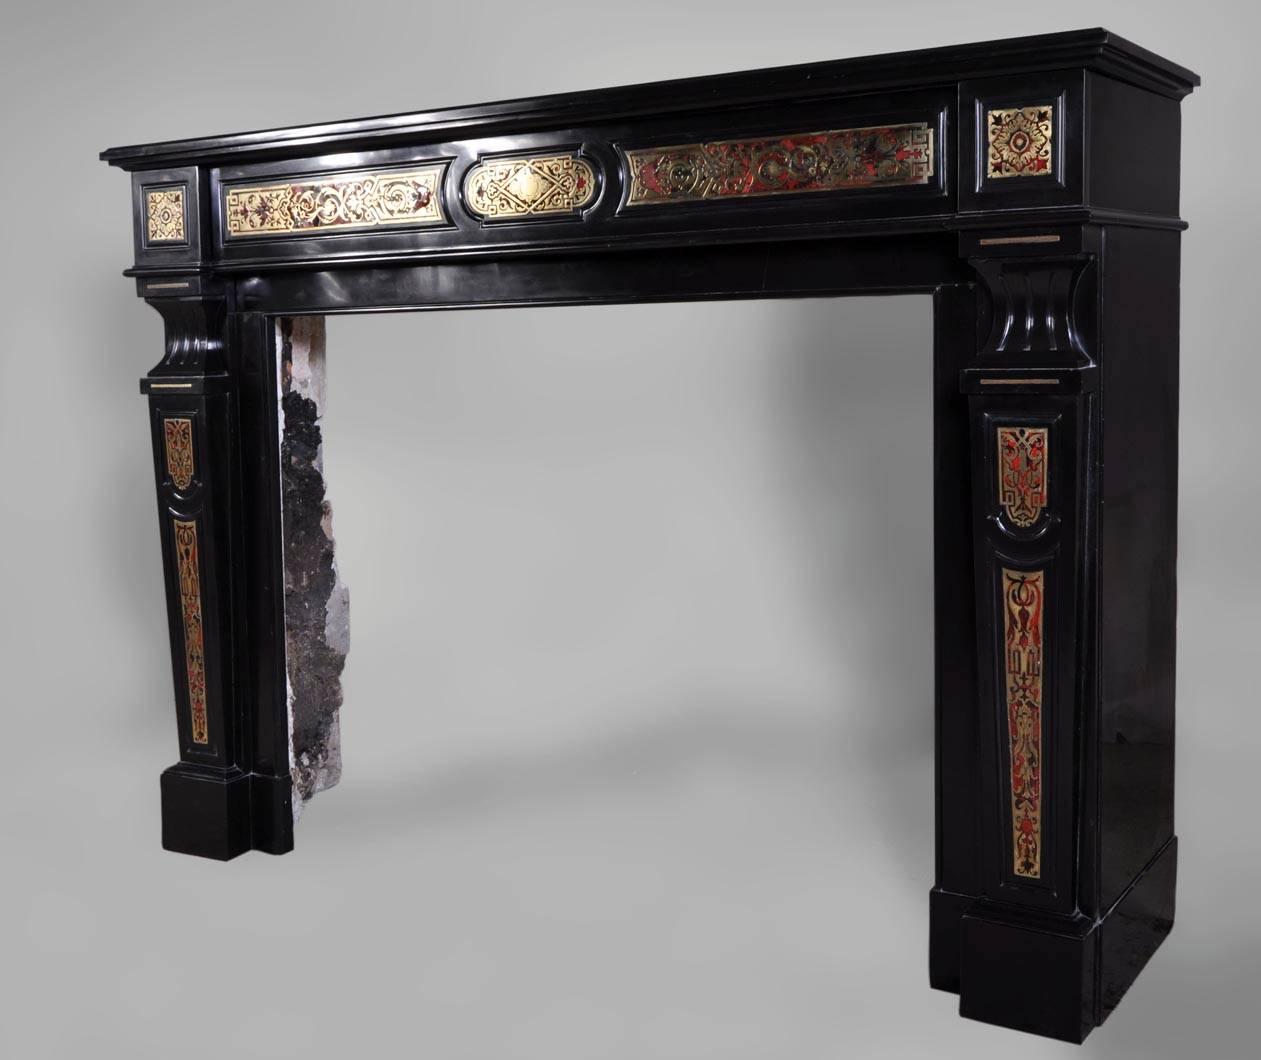 19th Century Napoleon III Period Fireplace in Black from Belgium Marble and Boulle Marquetry